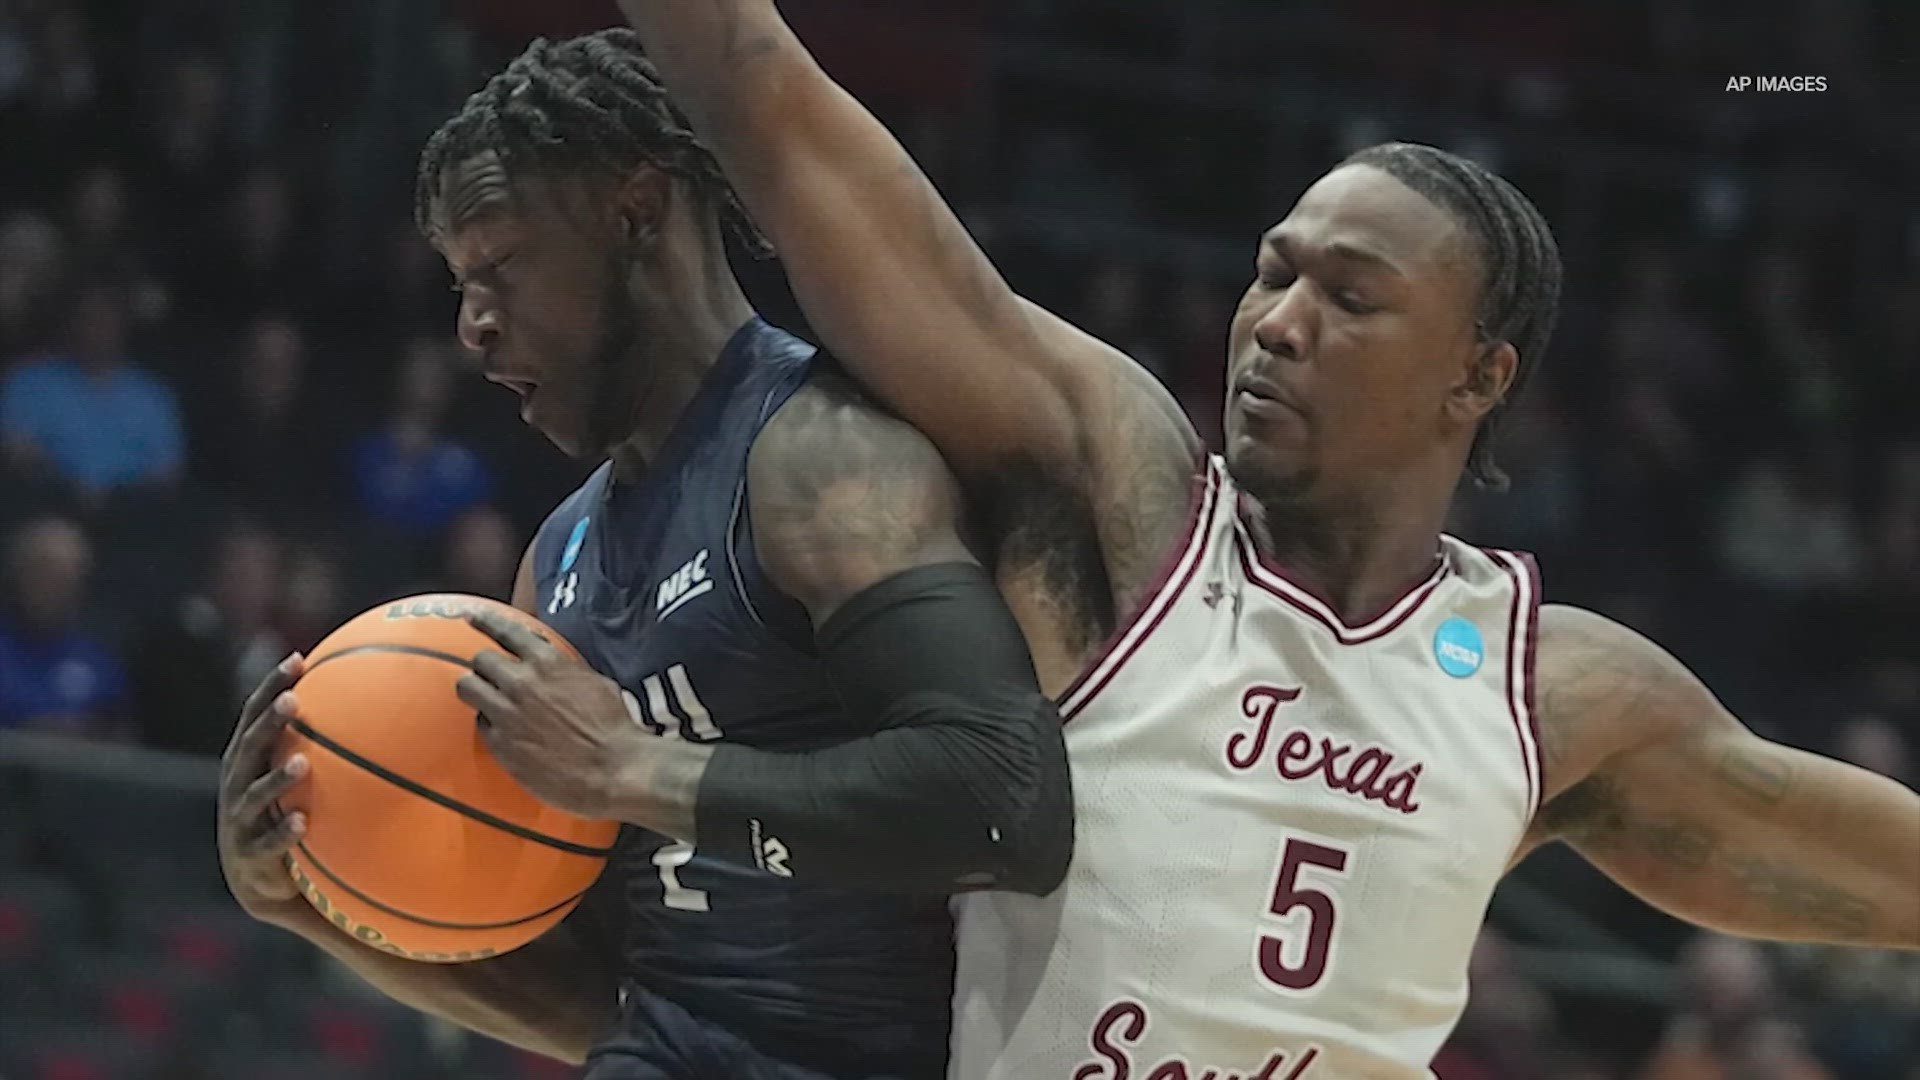 Texas Southern went down big early and was never able to catch back up.